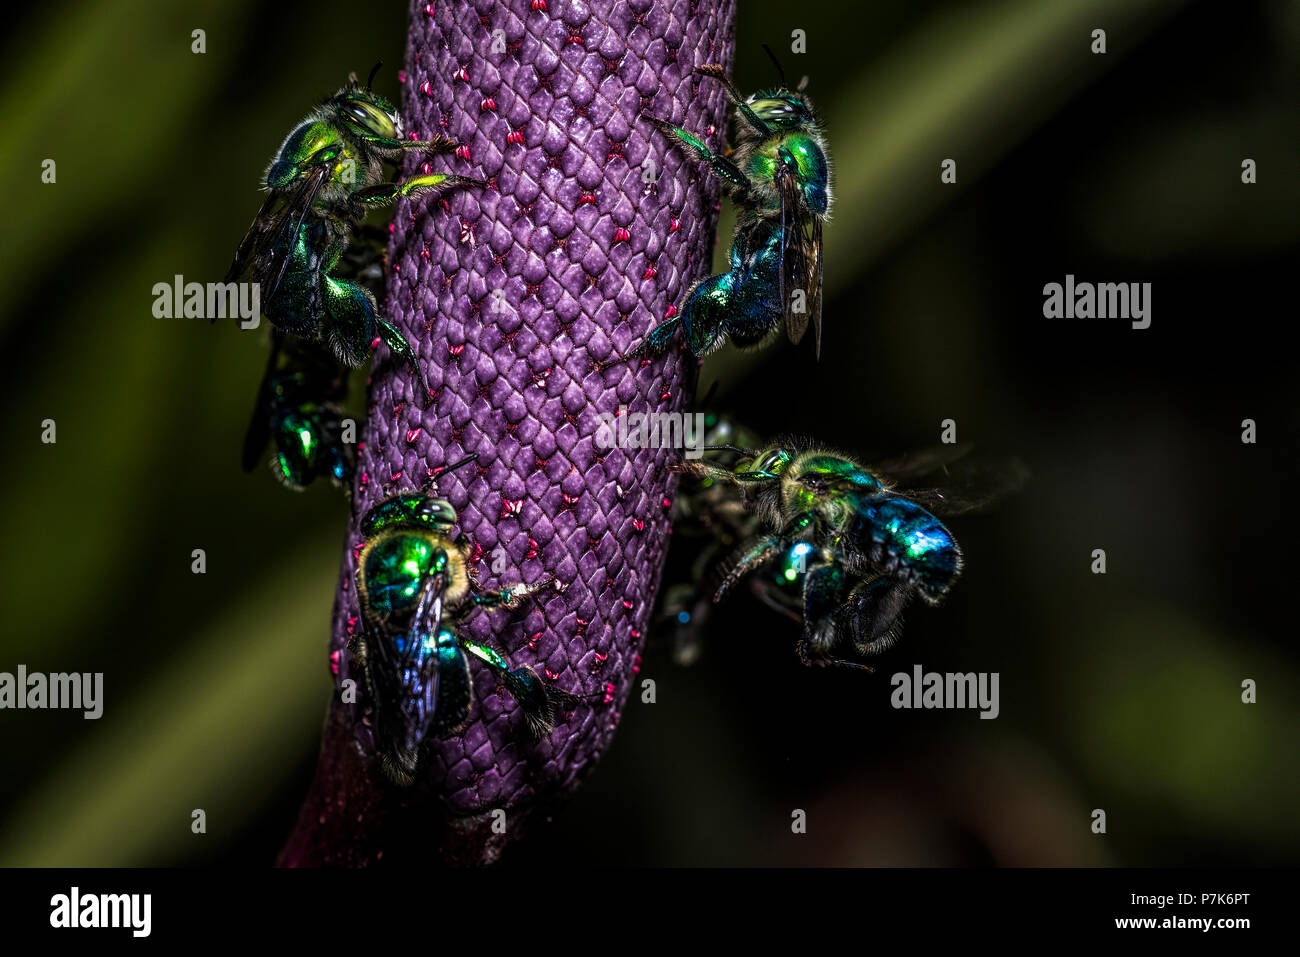 Euglossini bee also called orchid bees on a purple flower Stock Photo